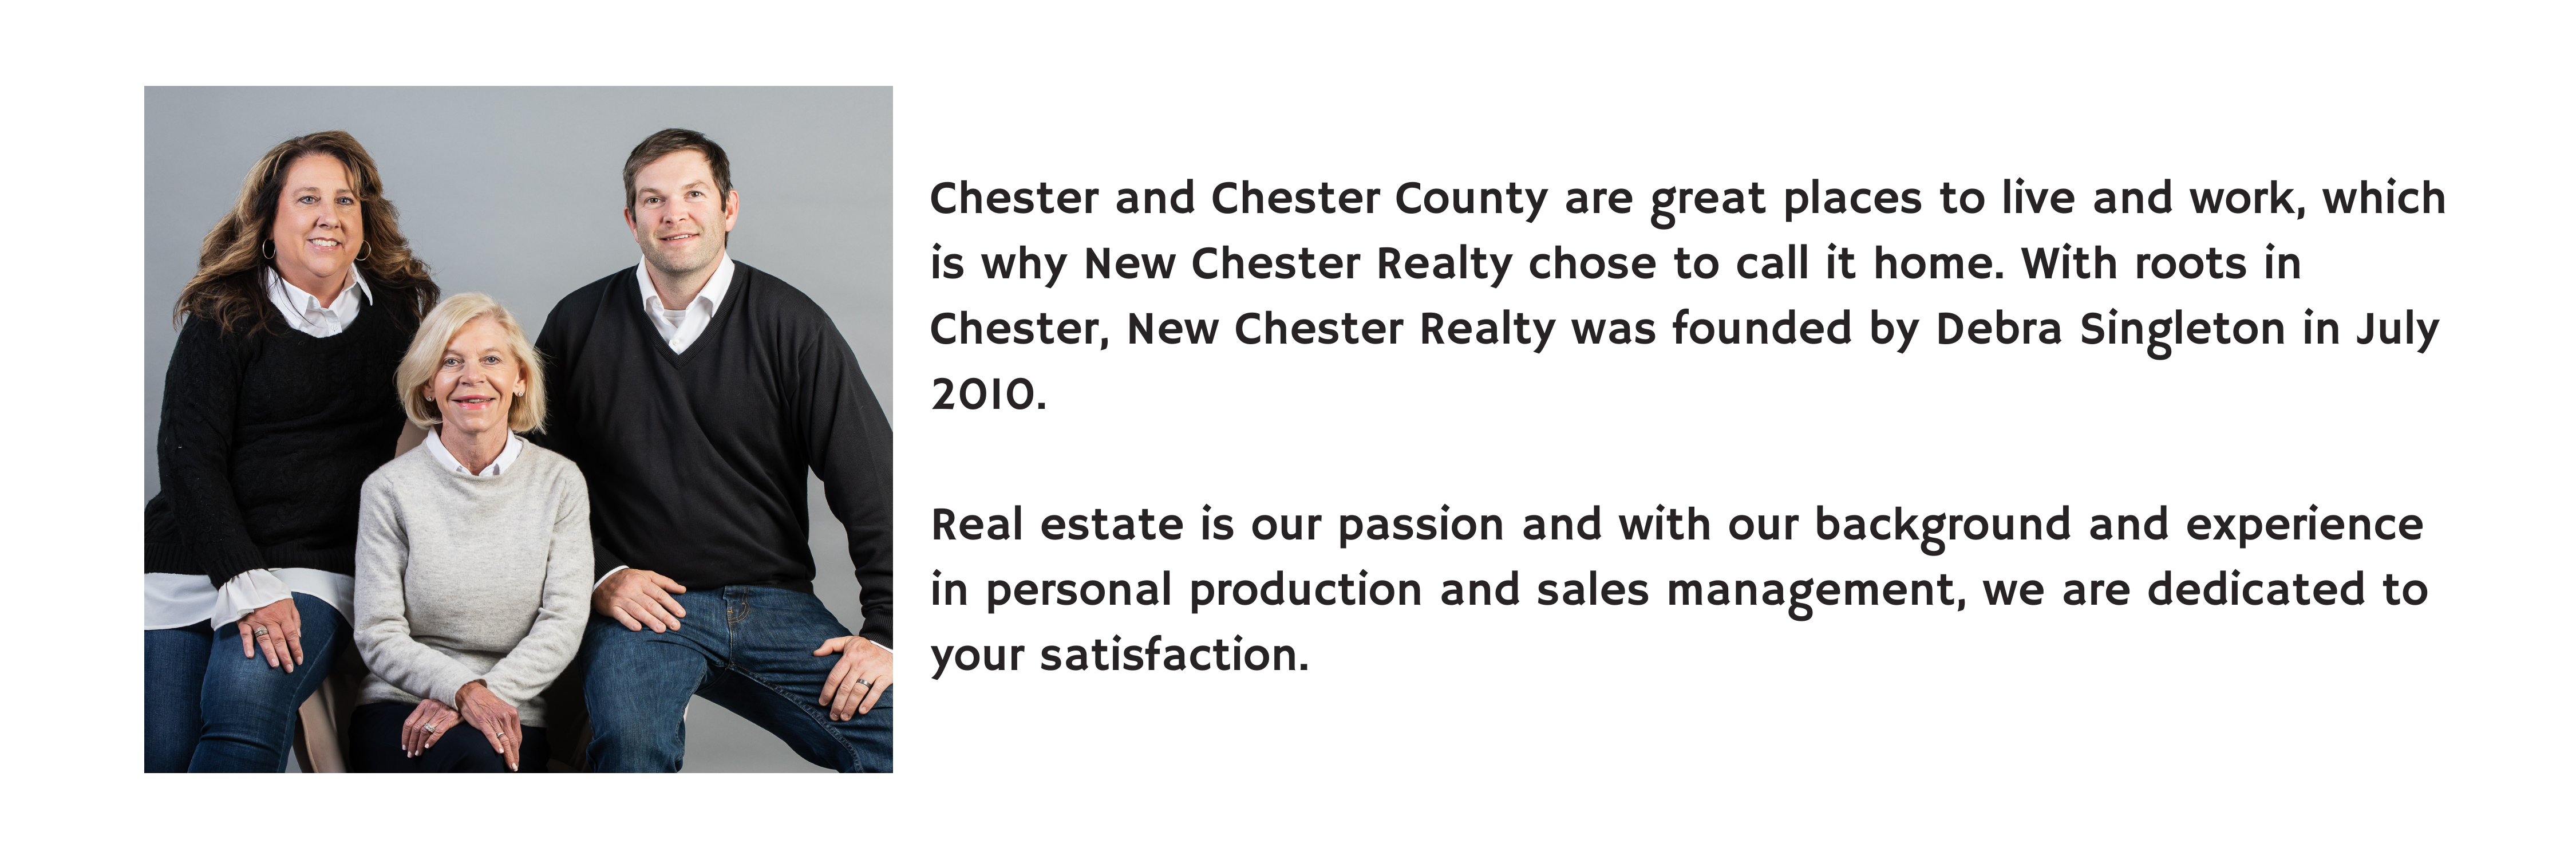 Chester and Chester County are great places to live and work, which is why New Chester Realty chose to call it home. With roots in Chester, New Chester Realty was founded by Debra Singleton in July 2010. Real estate is our passion and with our background and experience in personal production and sales management, we are dedicated to your satisfaction.